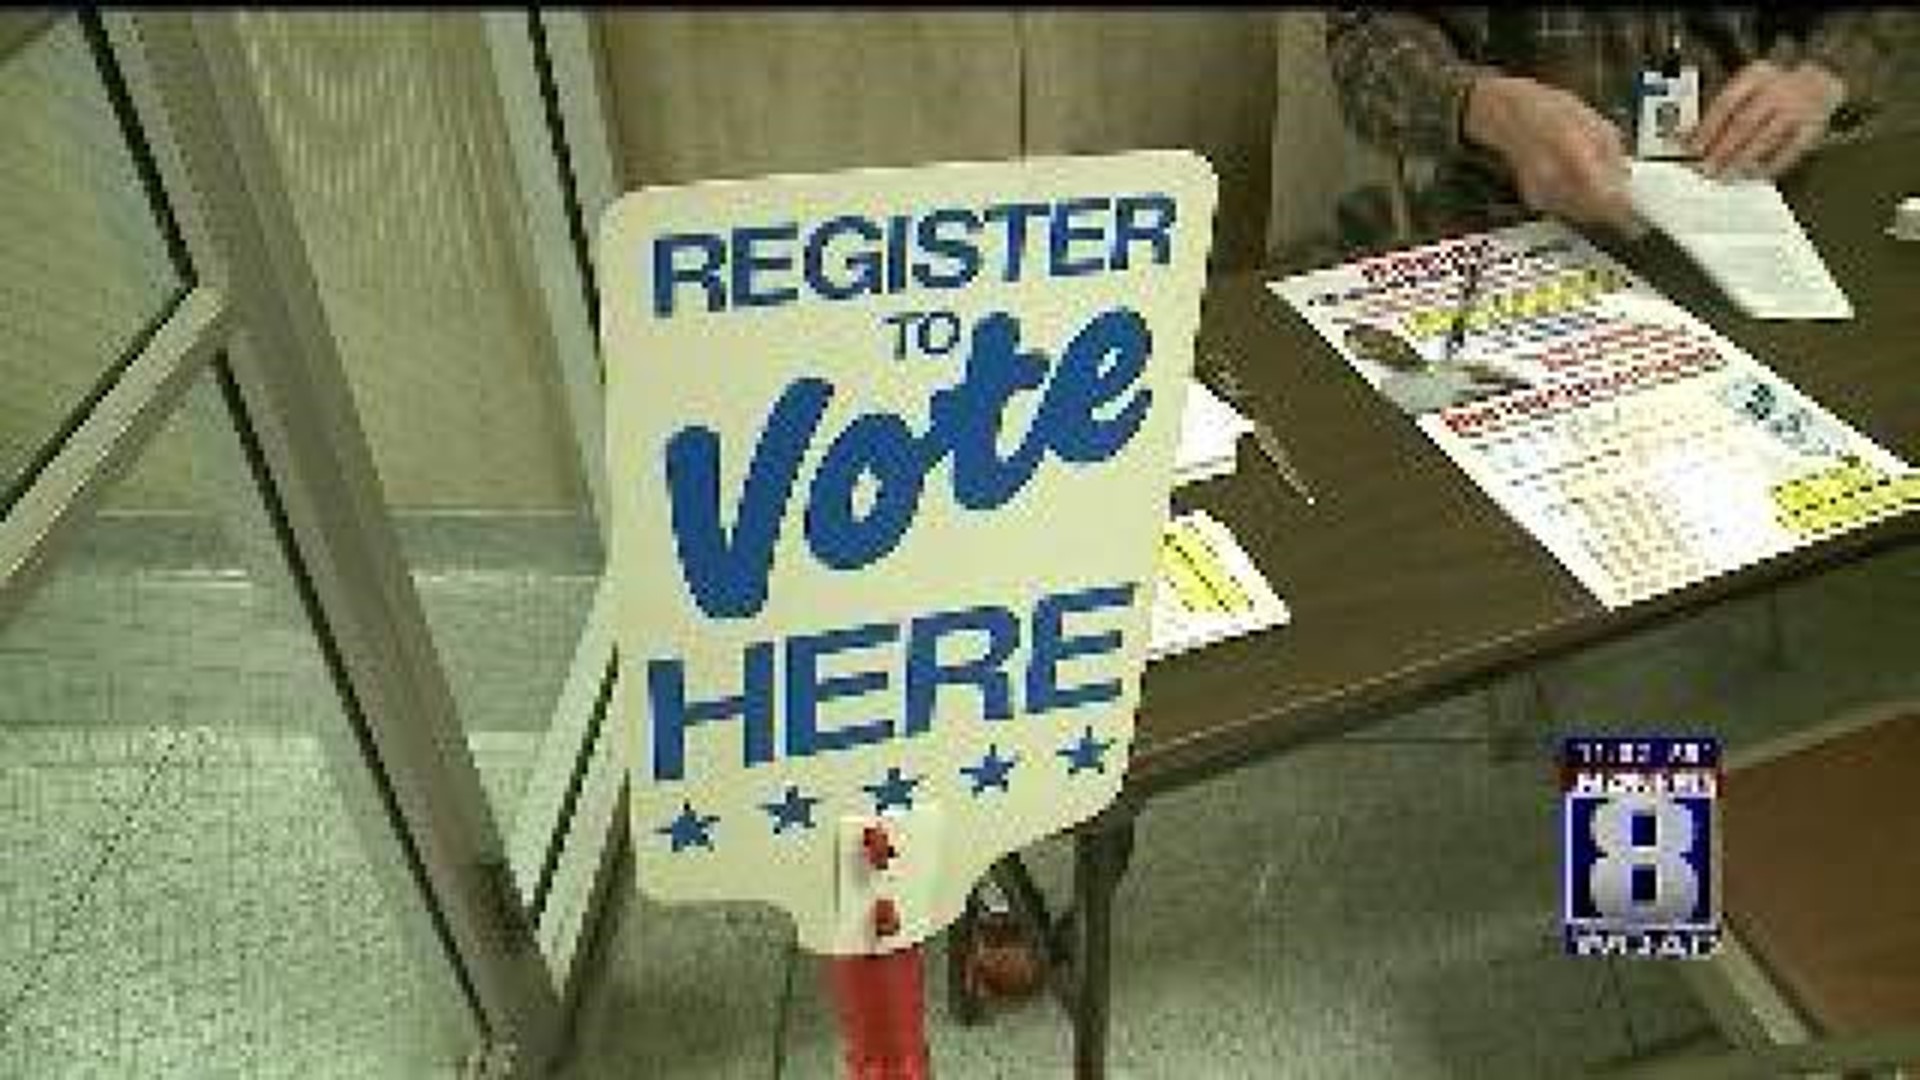 Tuesday is last day to register to vote in Illinois